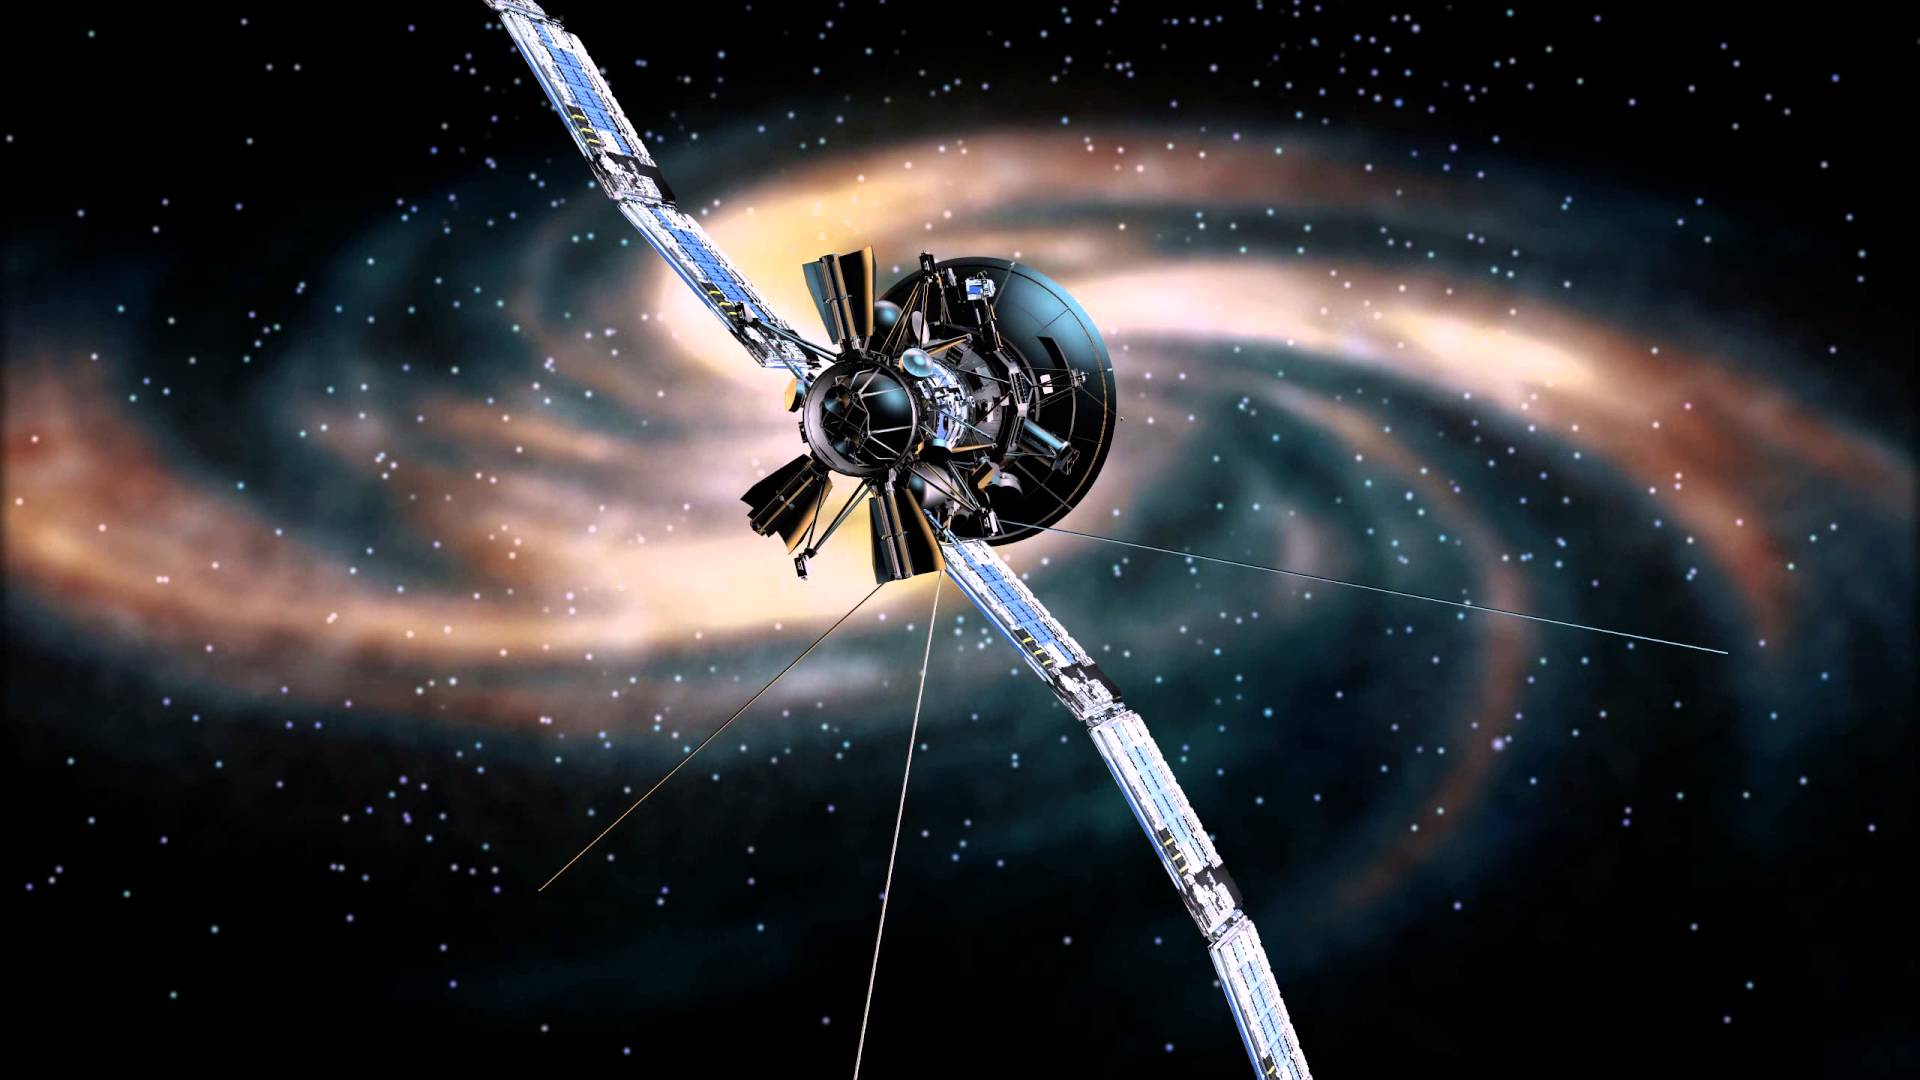 image of Space Probe Picture - #SpaceHero